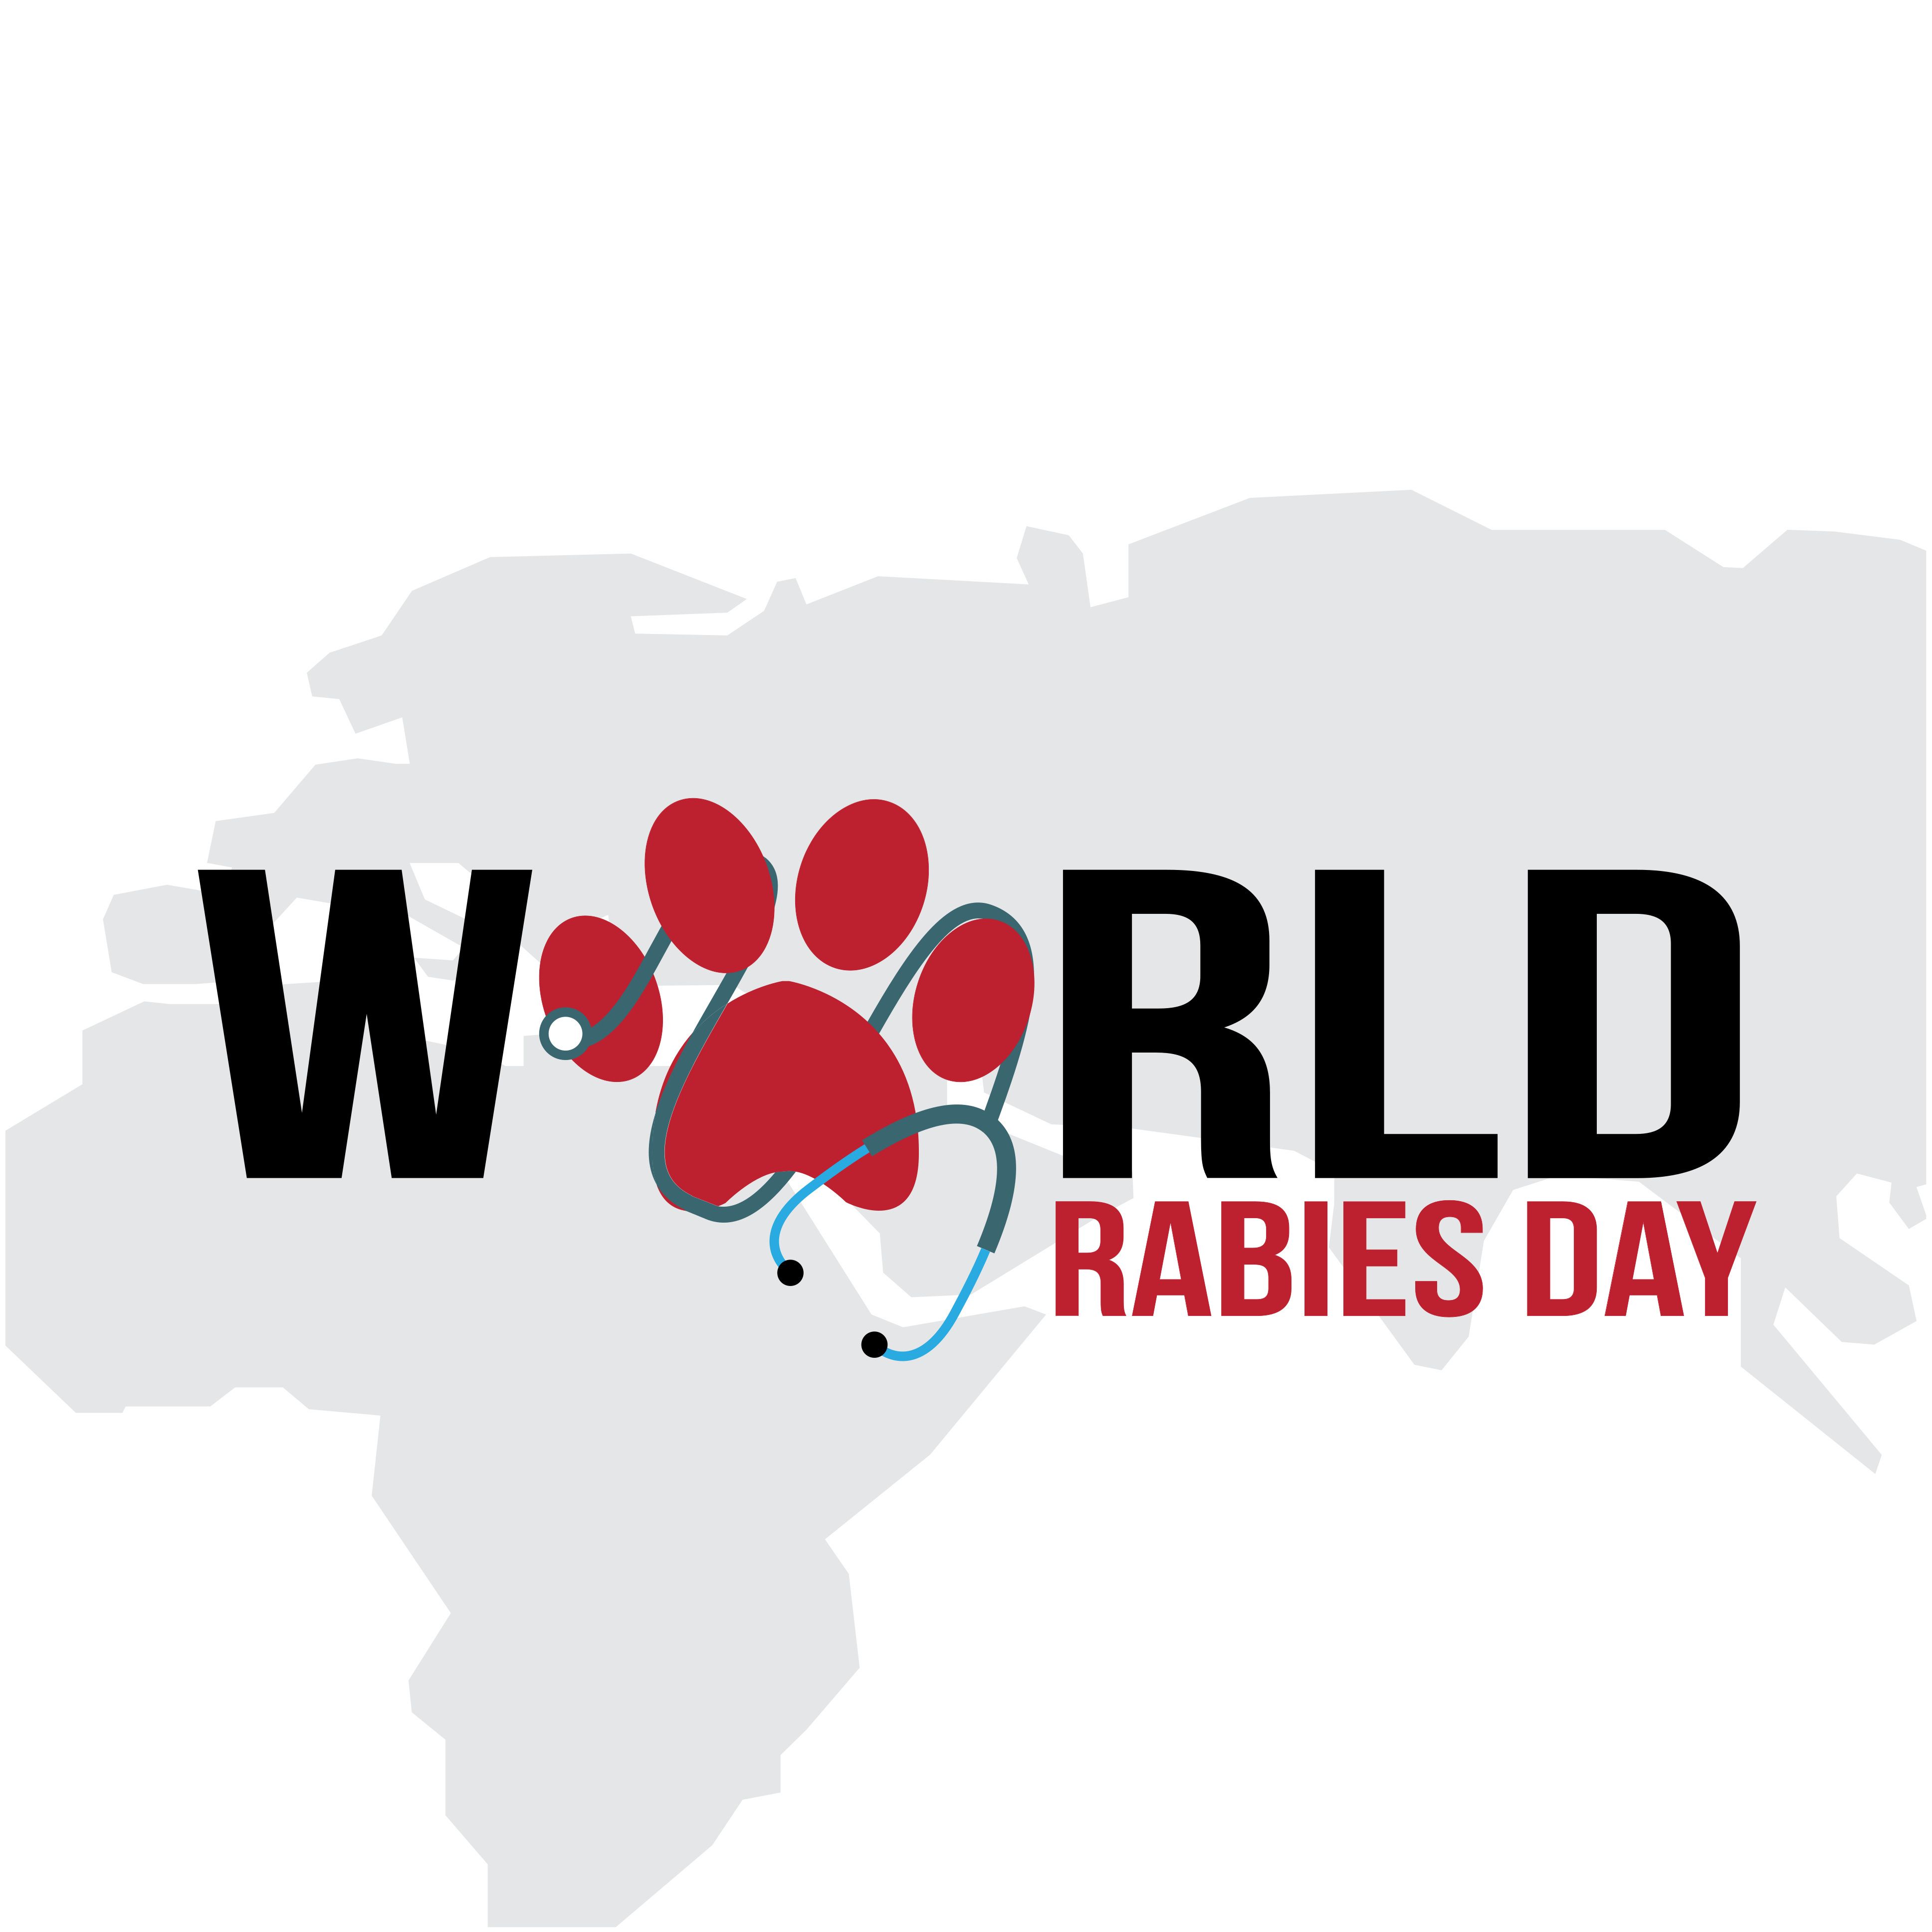 Celebrating World Rabies Day with 5 mustread rabies articles